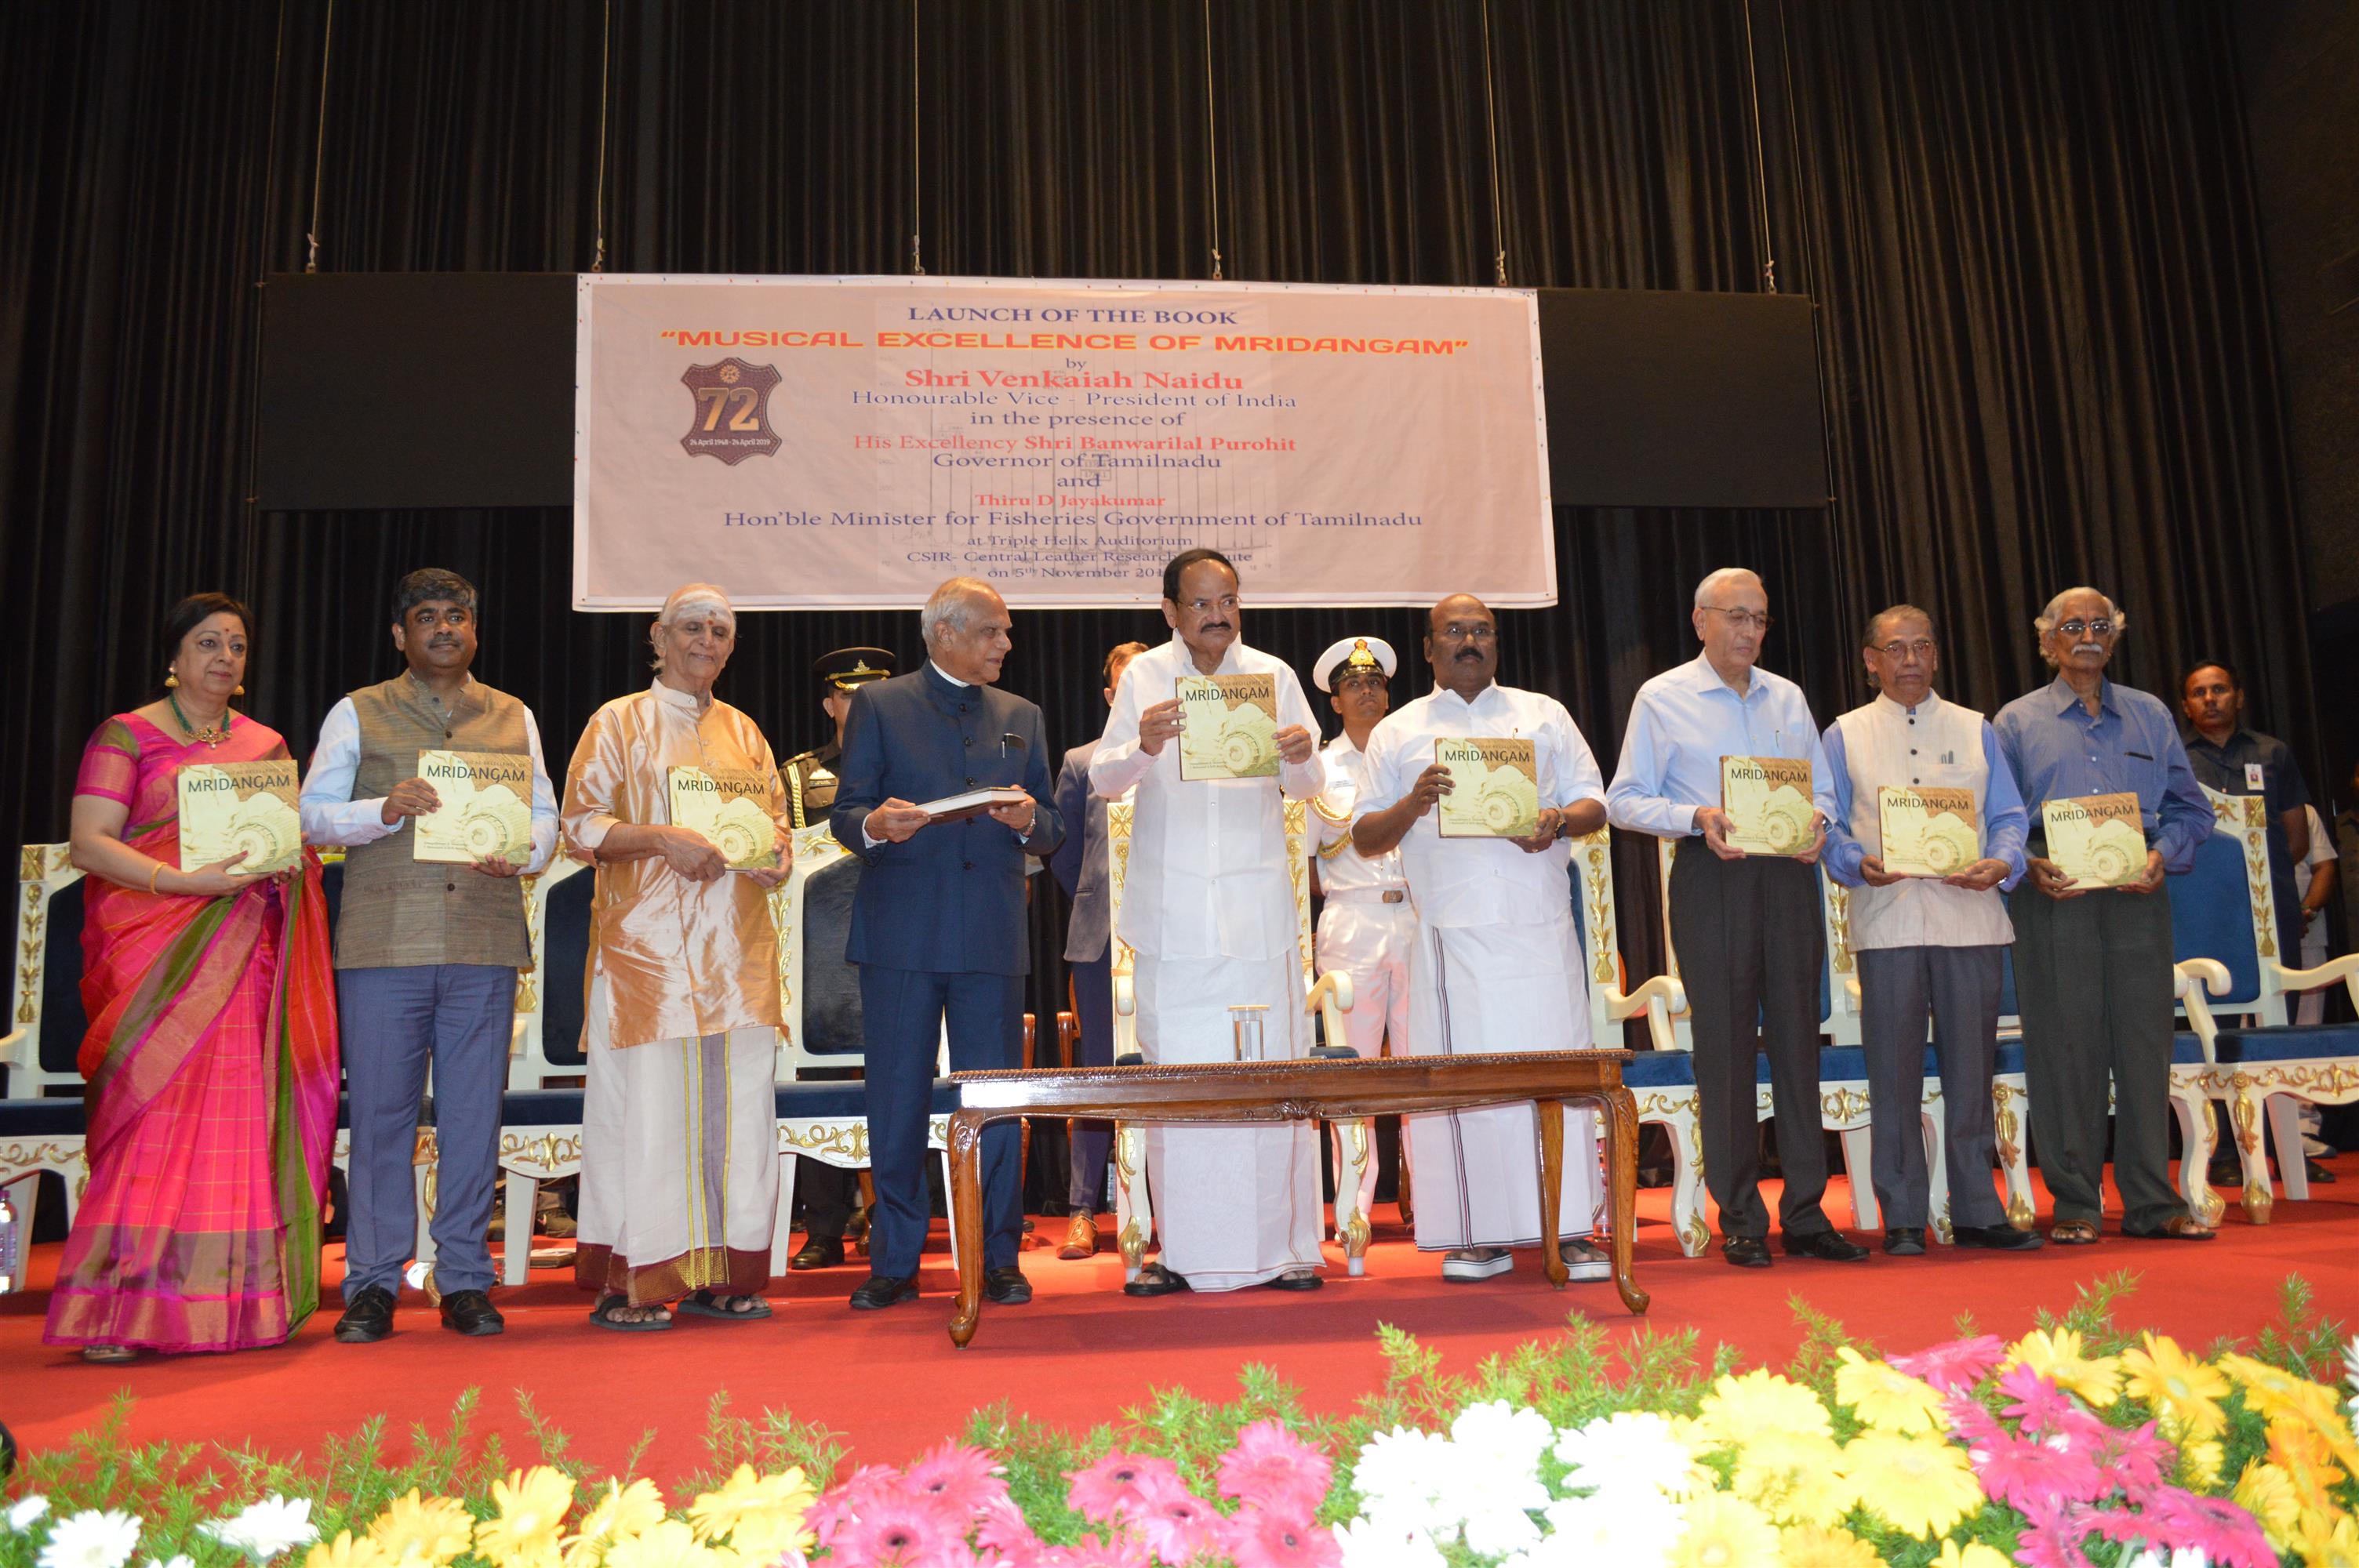 Vice President of India Shri M. Venkaiah Naidu releasing the monograph on 'Musical Excellence of Mridangam' at an event organised at CLRI Chennai. Tamil Nadu Governor Shri Banwarilal Purohit, State Fisheries Minister, Shri D. Jayakumar, and the authors of the book- noted Percussionist Dr Umayalpuram Sivaraman, Dr T. Ramasami, former Secretary, Dept of Science & Technology and Dr M. D. Naresh are seen. Director CLRI, Dr S. Kapuraia, Shri Murali of the Hindu Group of Publications and Carnatic Singer Smt Geetha Rajasekhar are also seen.